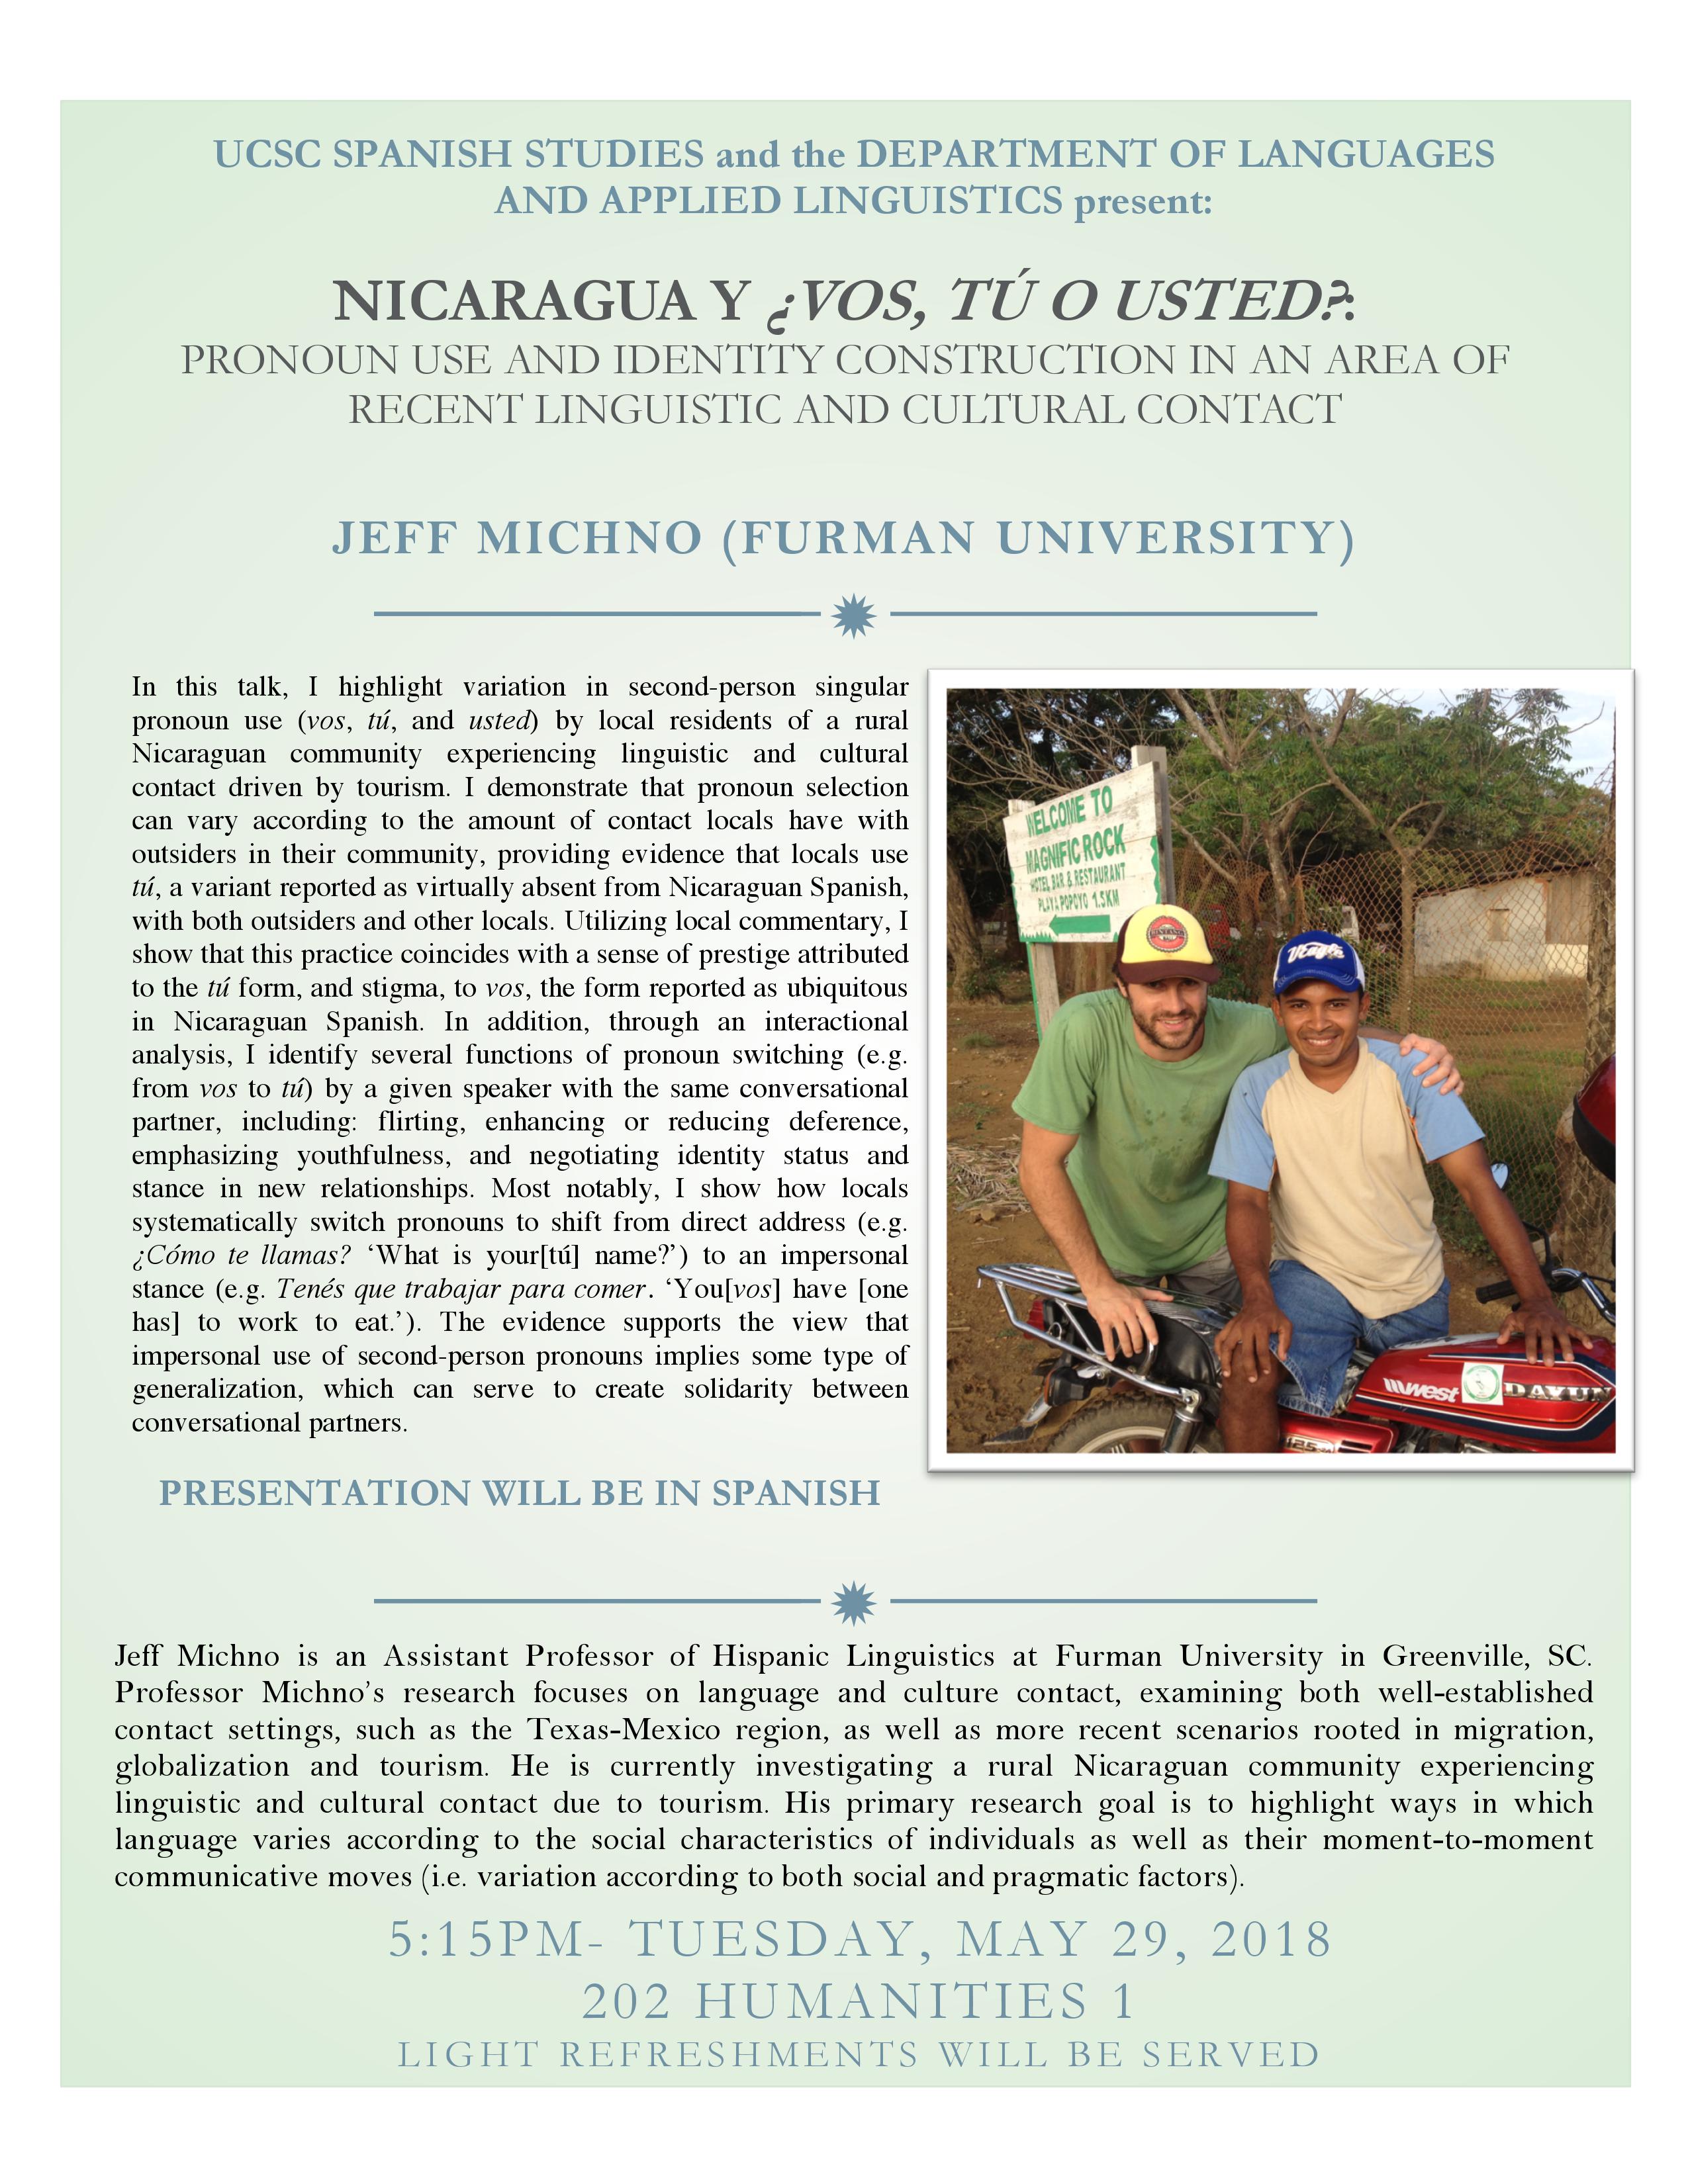 A green flyer with text is shown. One image, on the right, shows two men and a motorcycle.